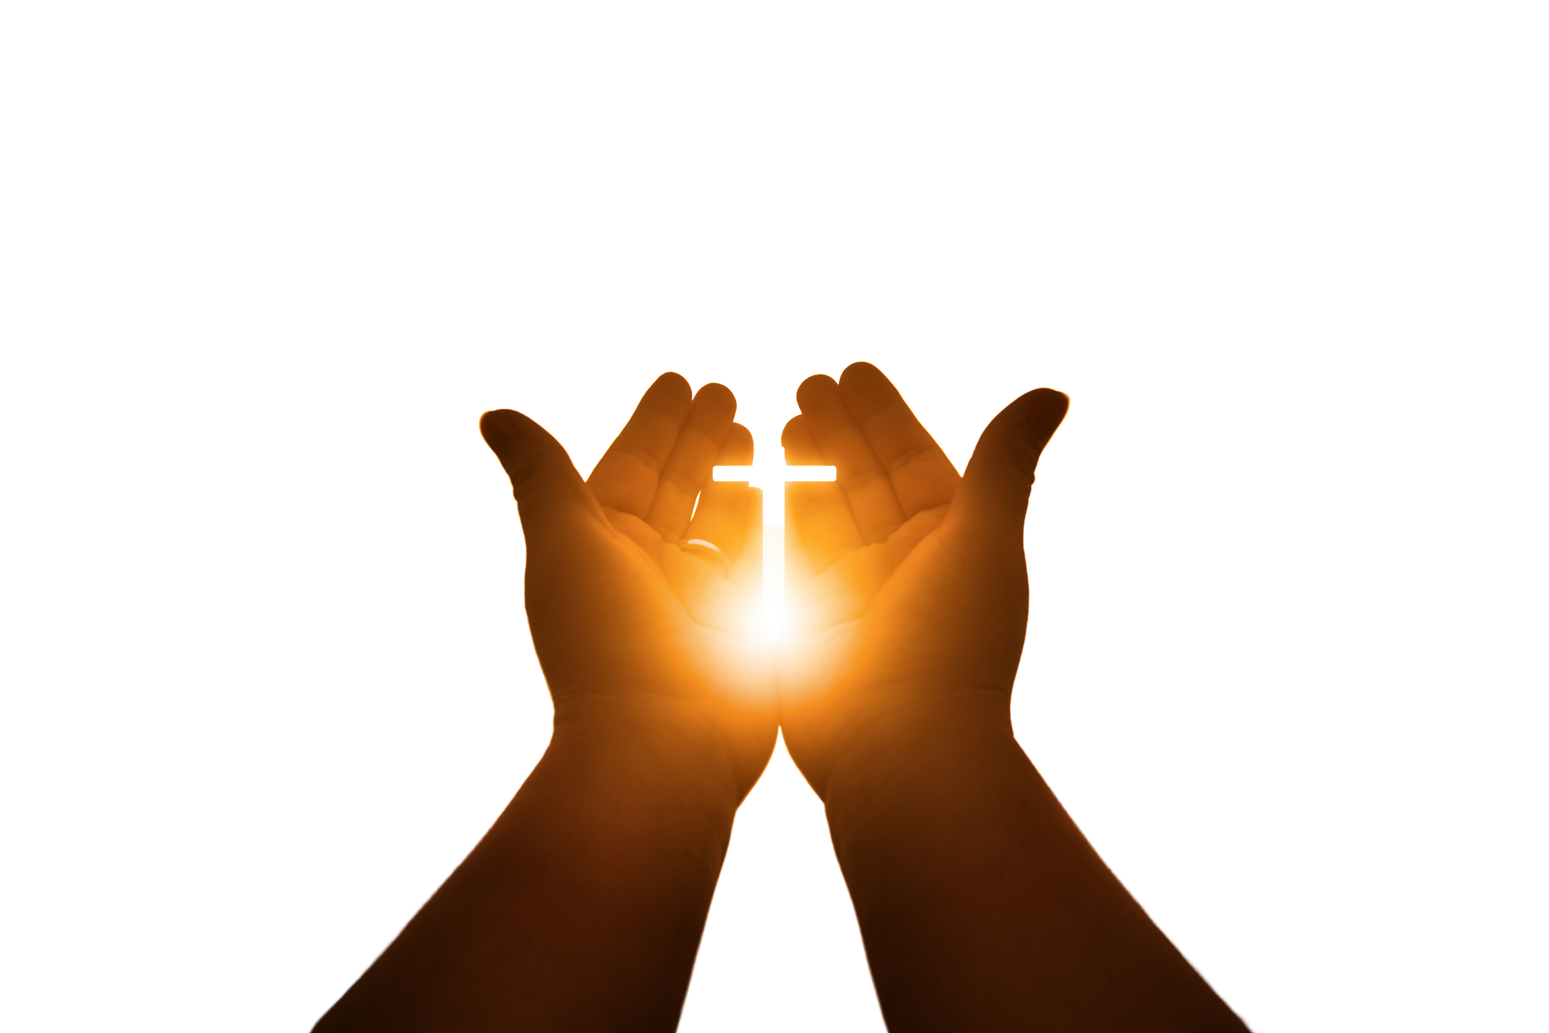 Person's Hands with Cross Silhouette and Sunlight